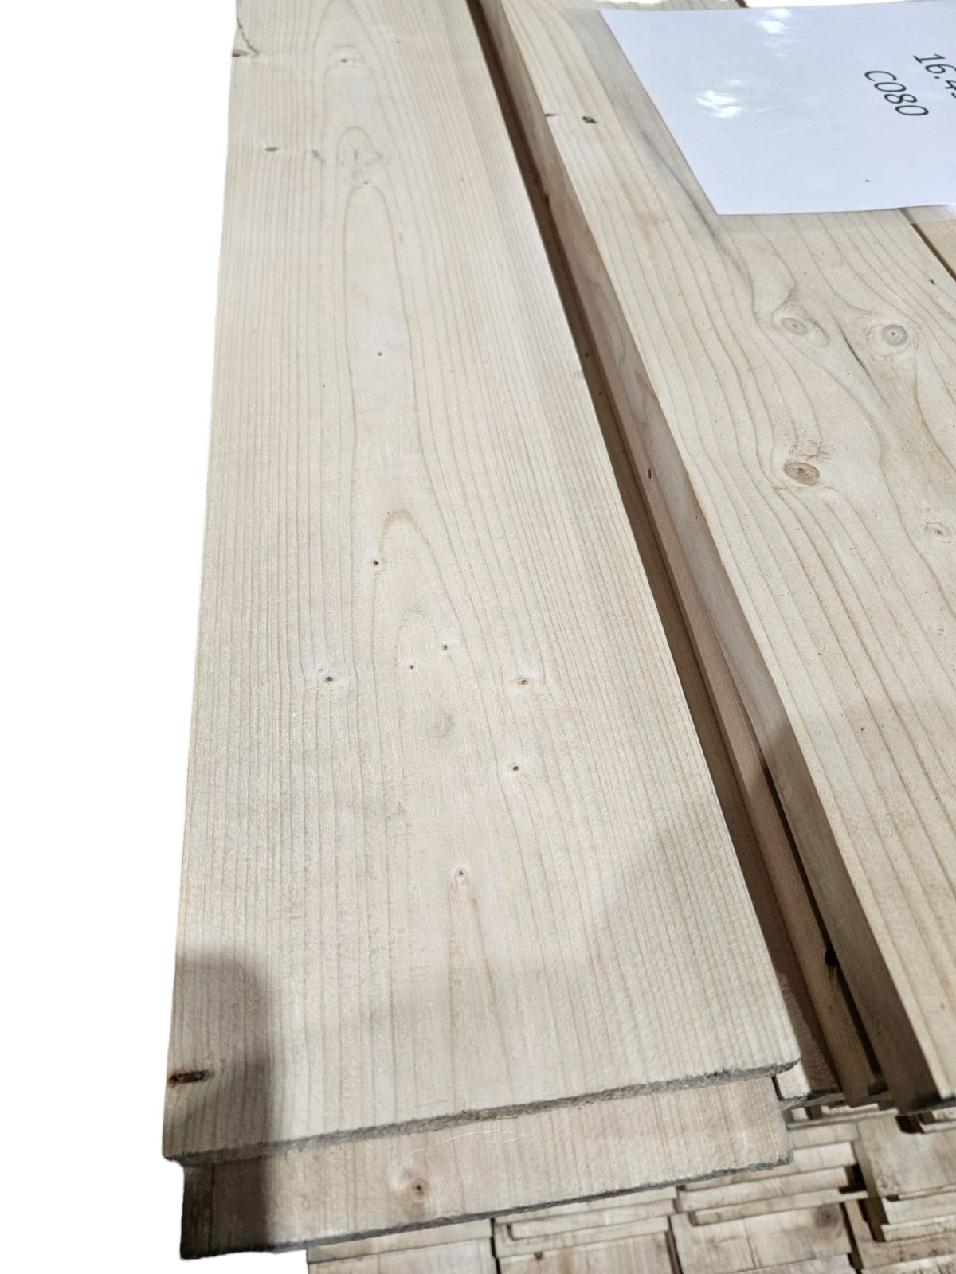 1X6X16 FOOT SPRUCE #2 SPF  STORE PICKUP ONLY - FreemanLiquidators - [product_description]